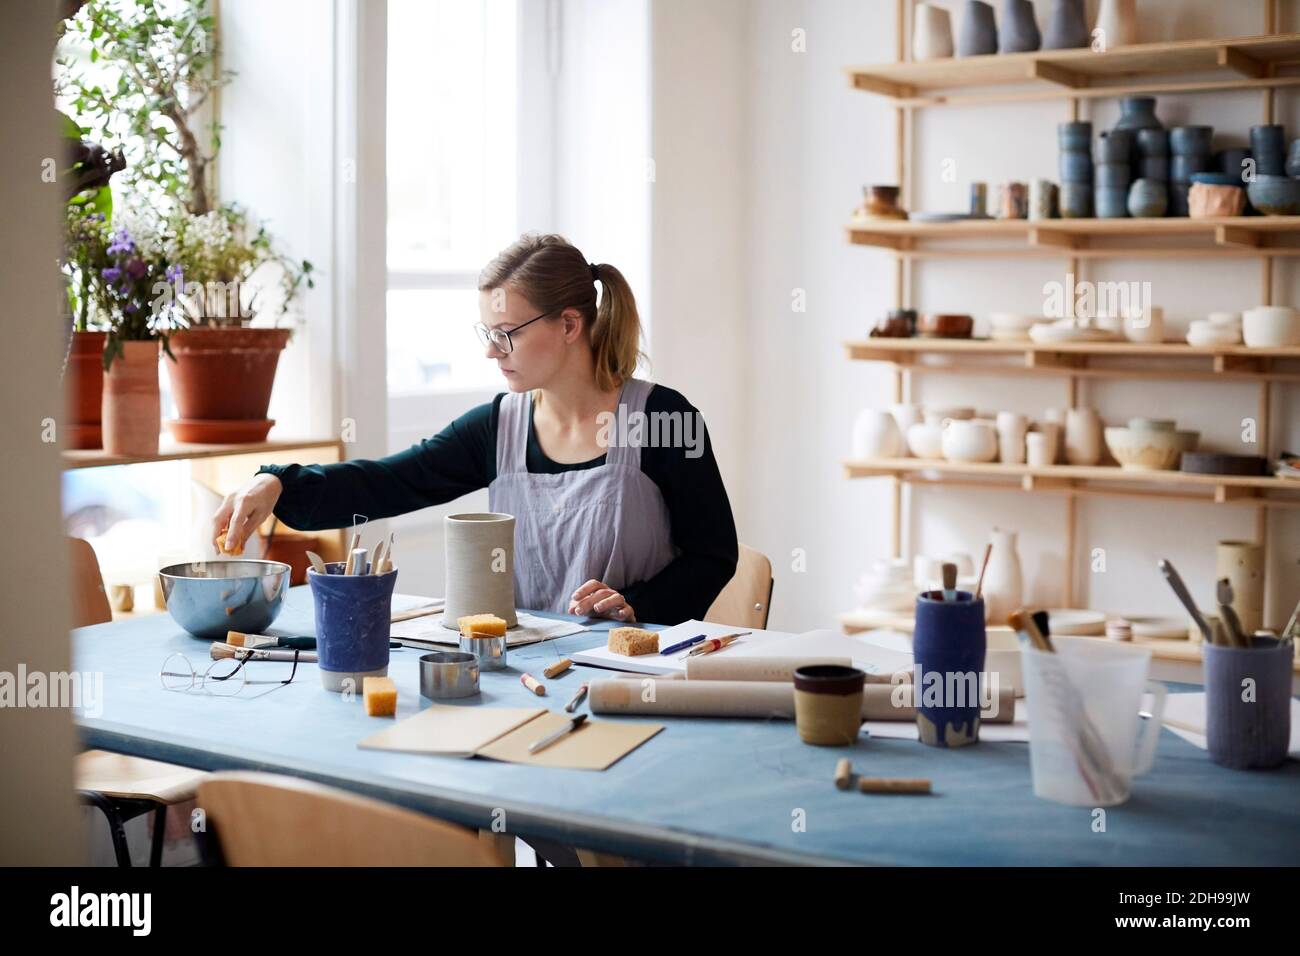 Young woman learning pottery in art class Stock Photo